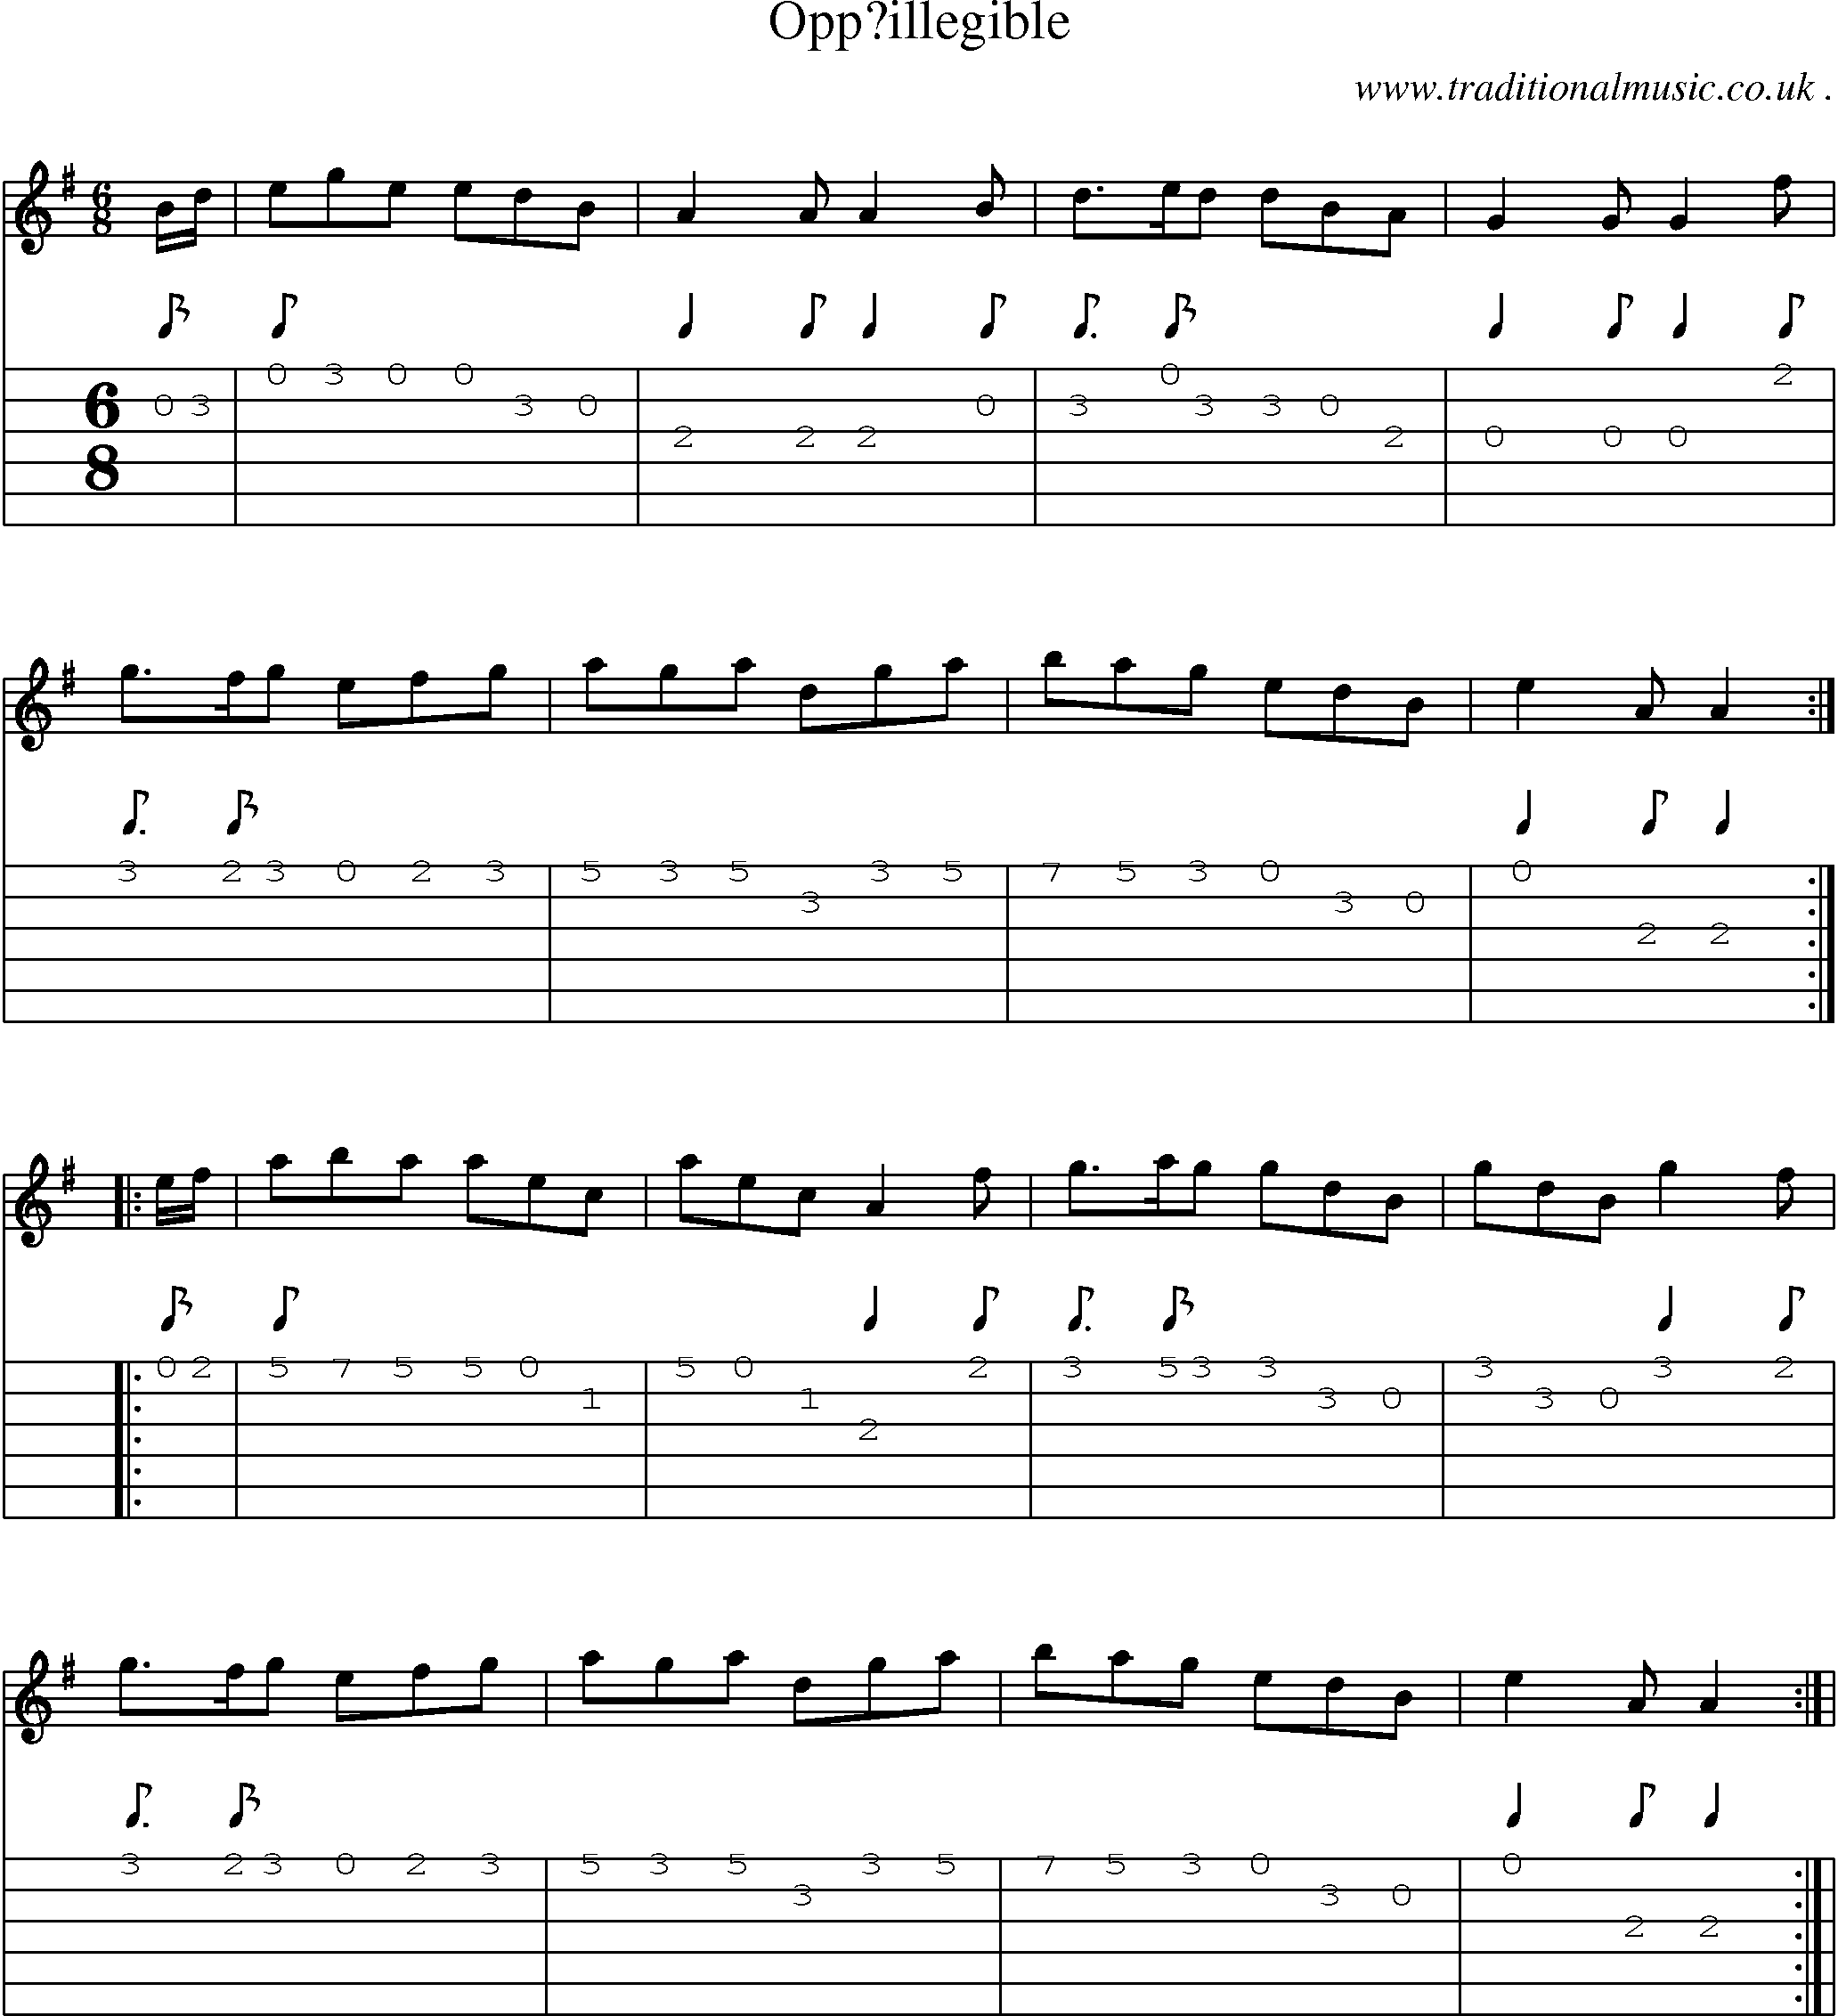 Sheet-Music and Guitar Tabs for Oppillegible